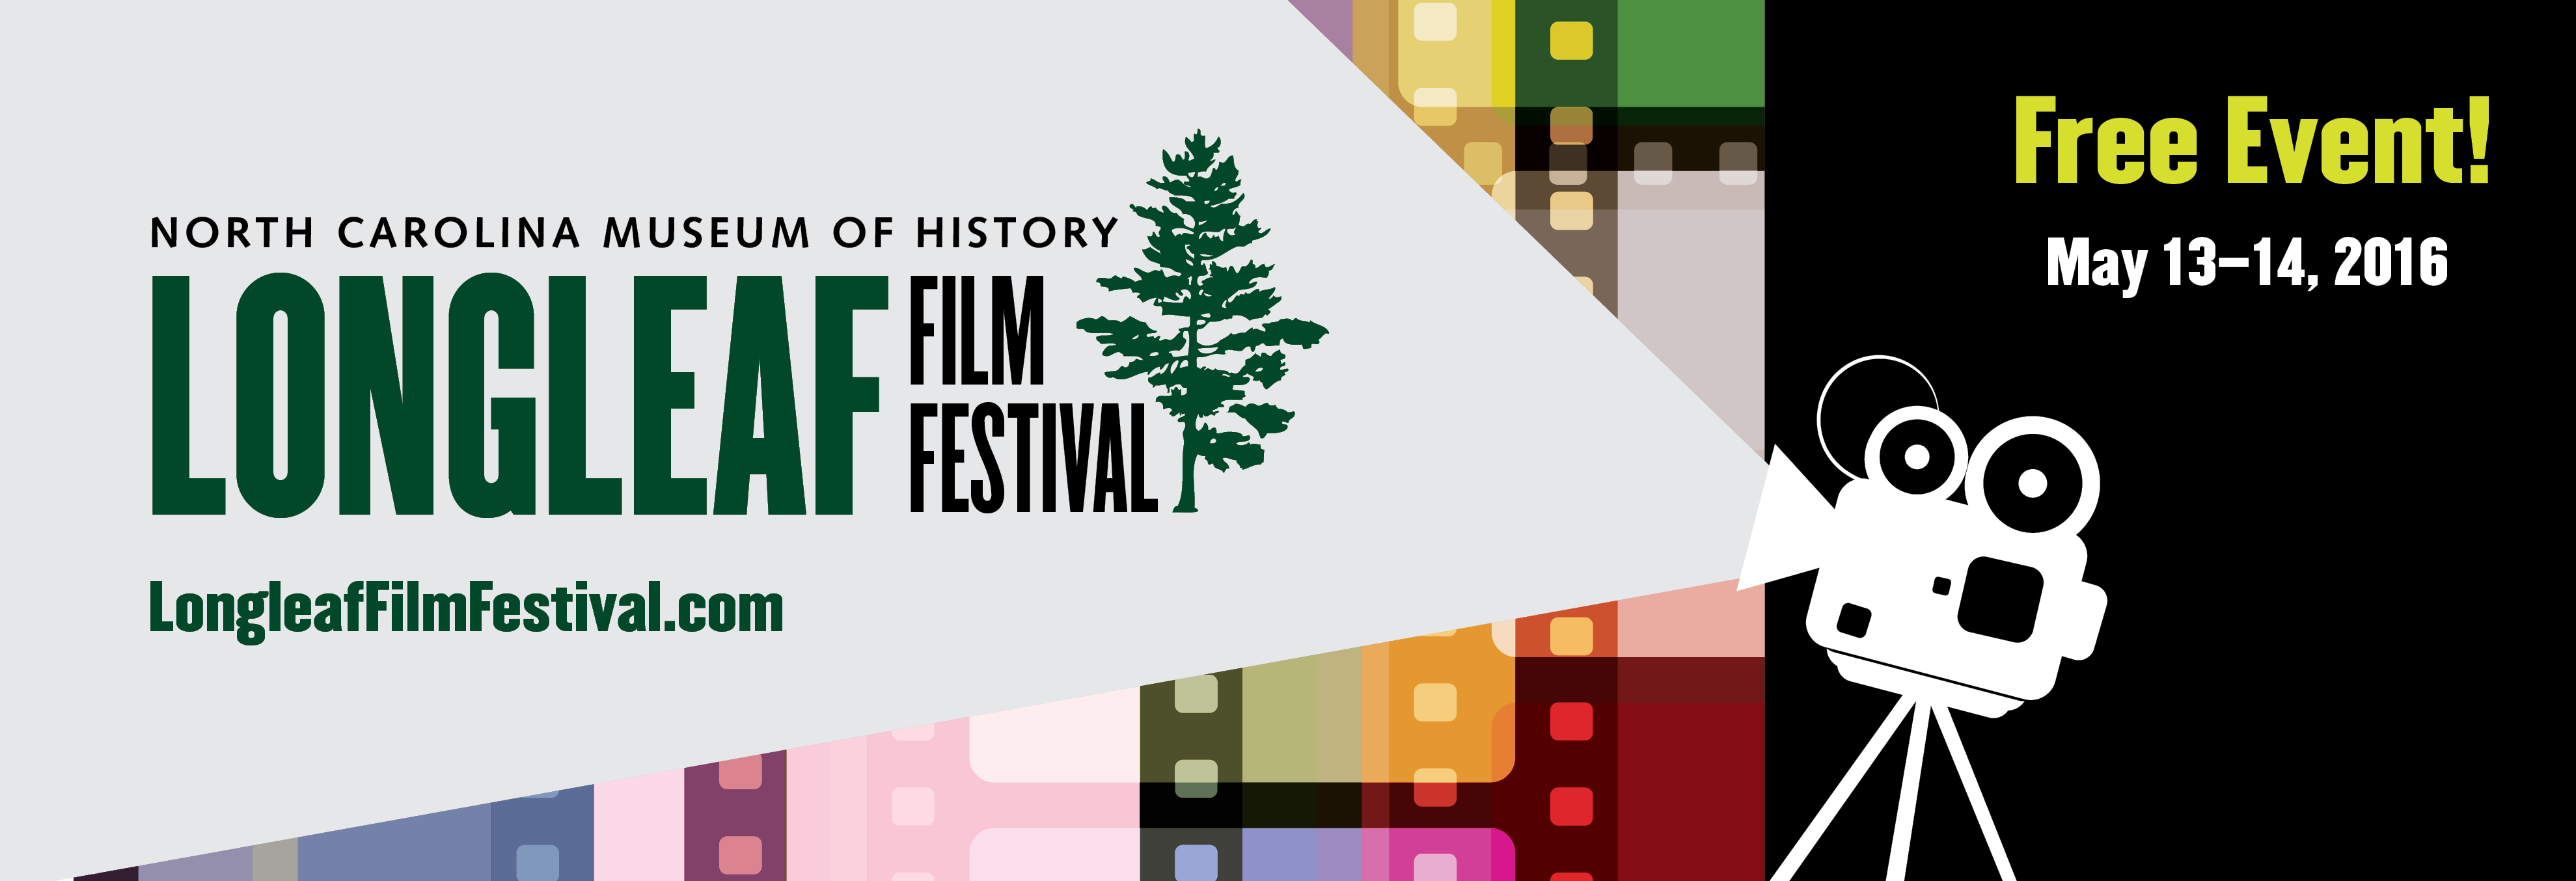 Longleaf Film Festival at the NC Museum of History, 2016